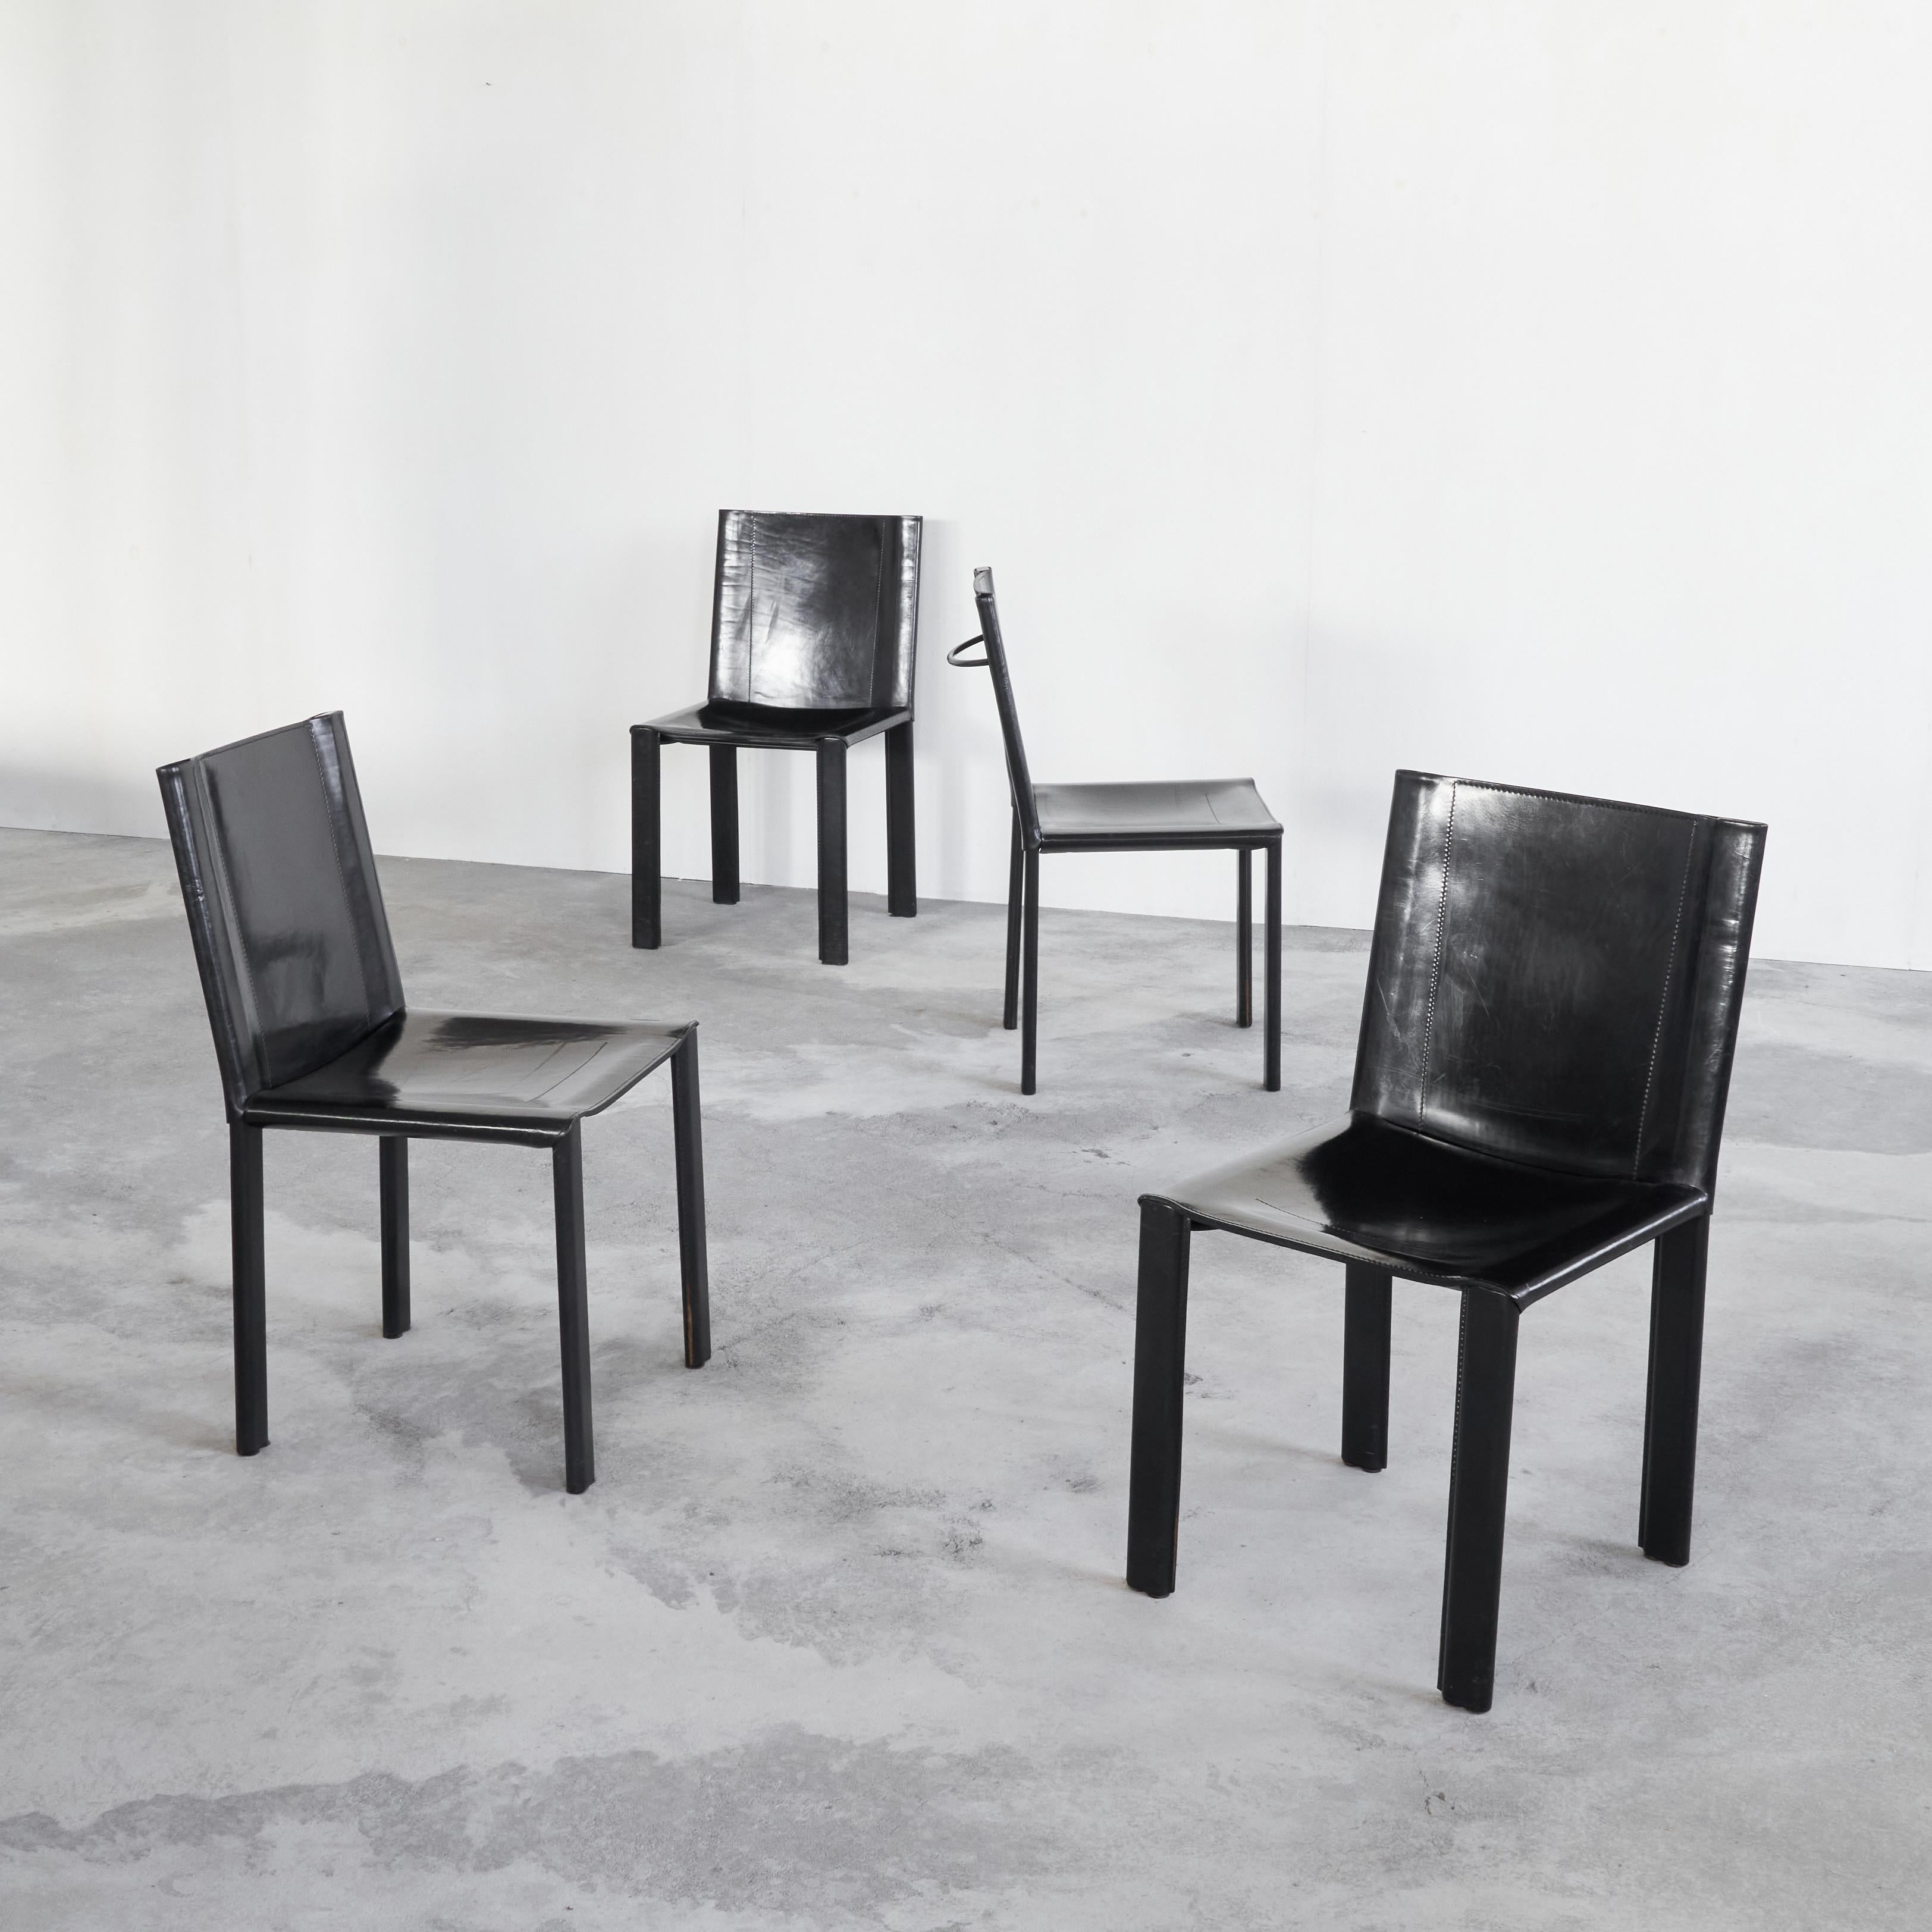 20th Century Set of 4 Black Leather Chairs by Matteo Grassi, Italy, 1990s For Sale